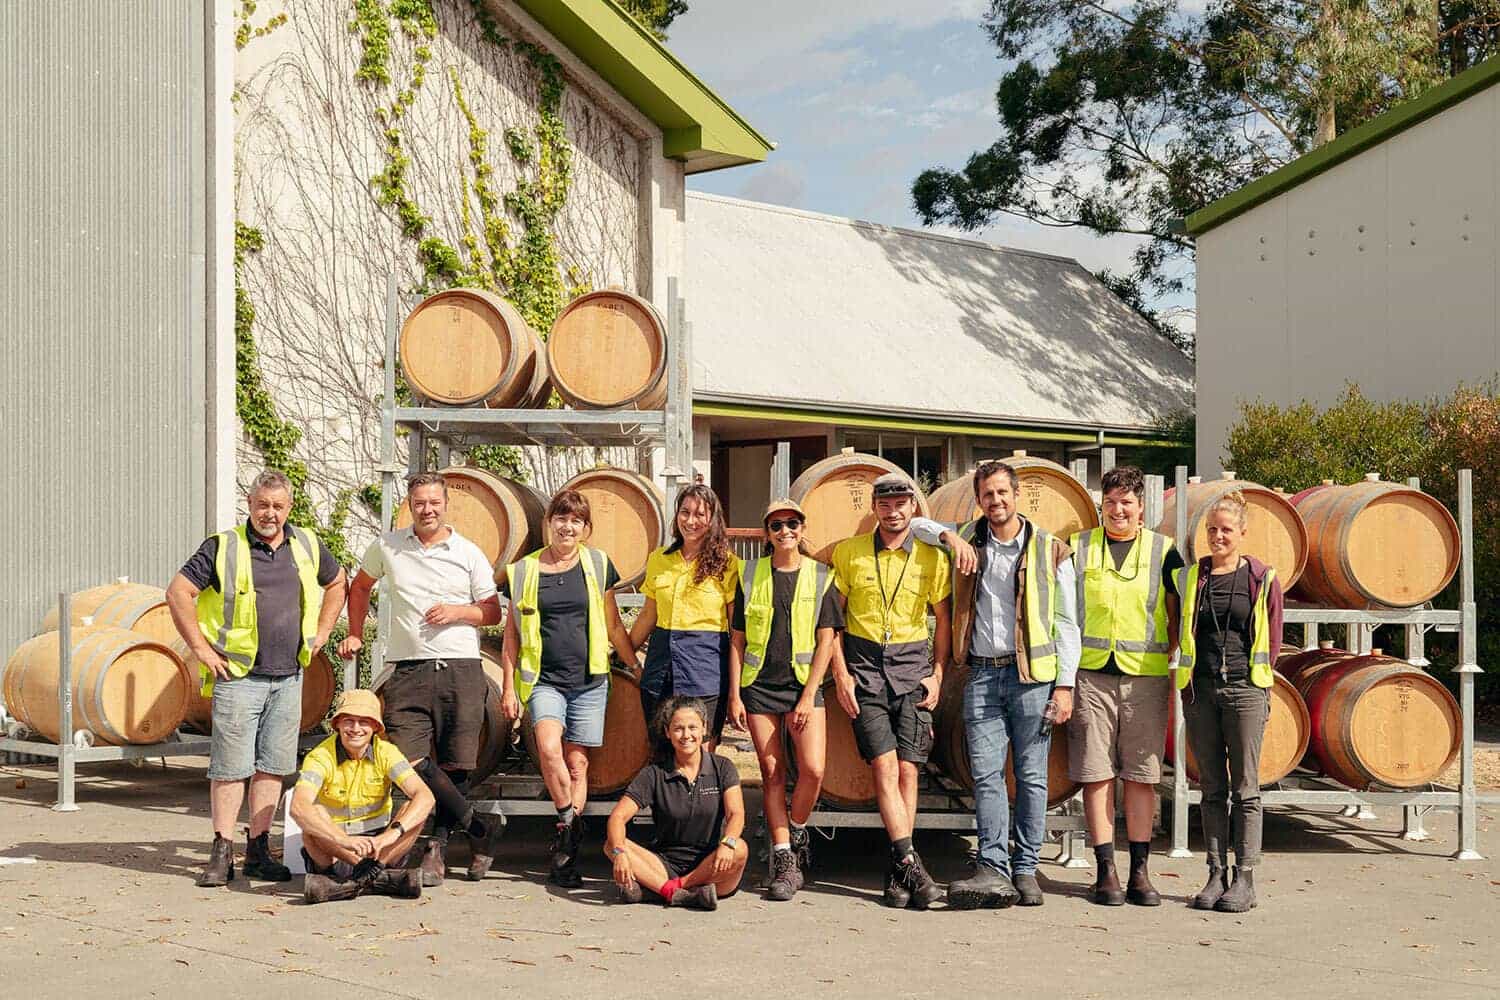 Group photo of Cloudy Bay staff standing in front of wine barrels